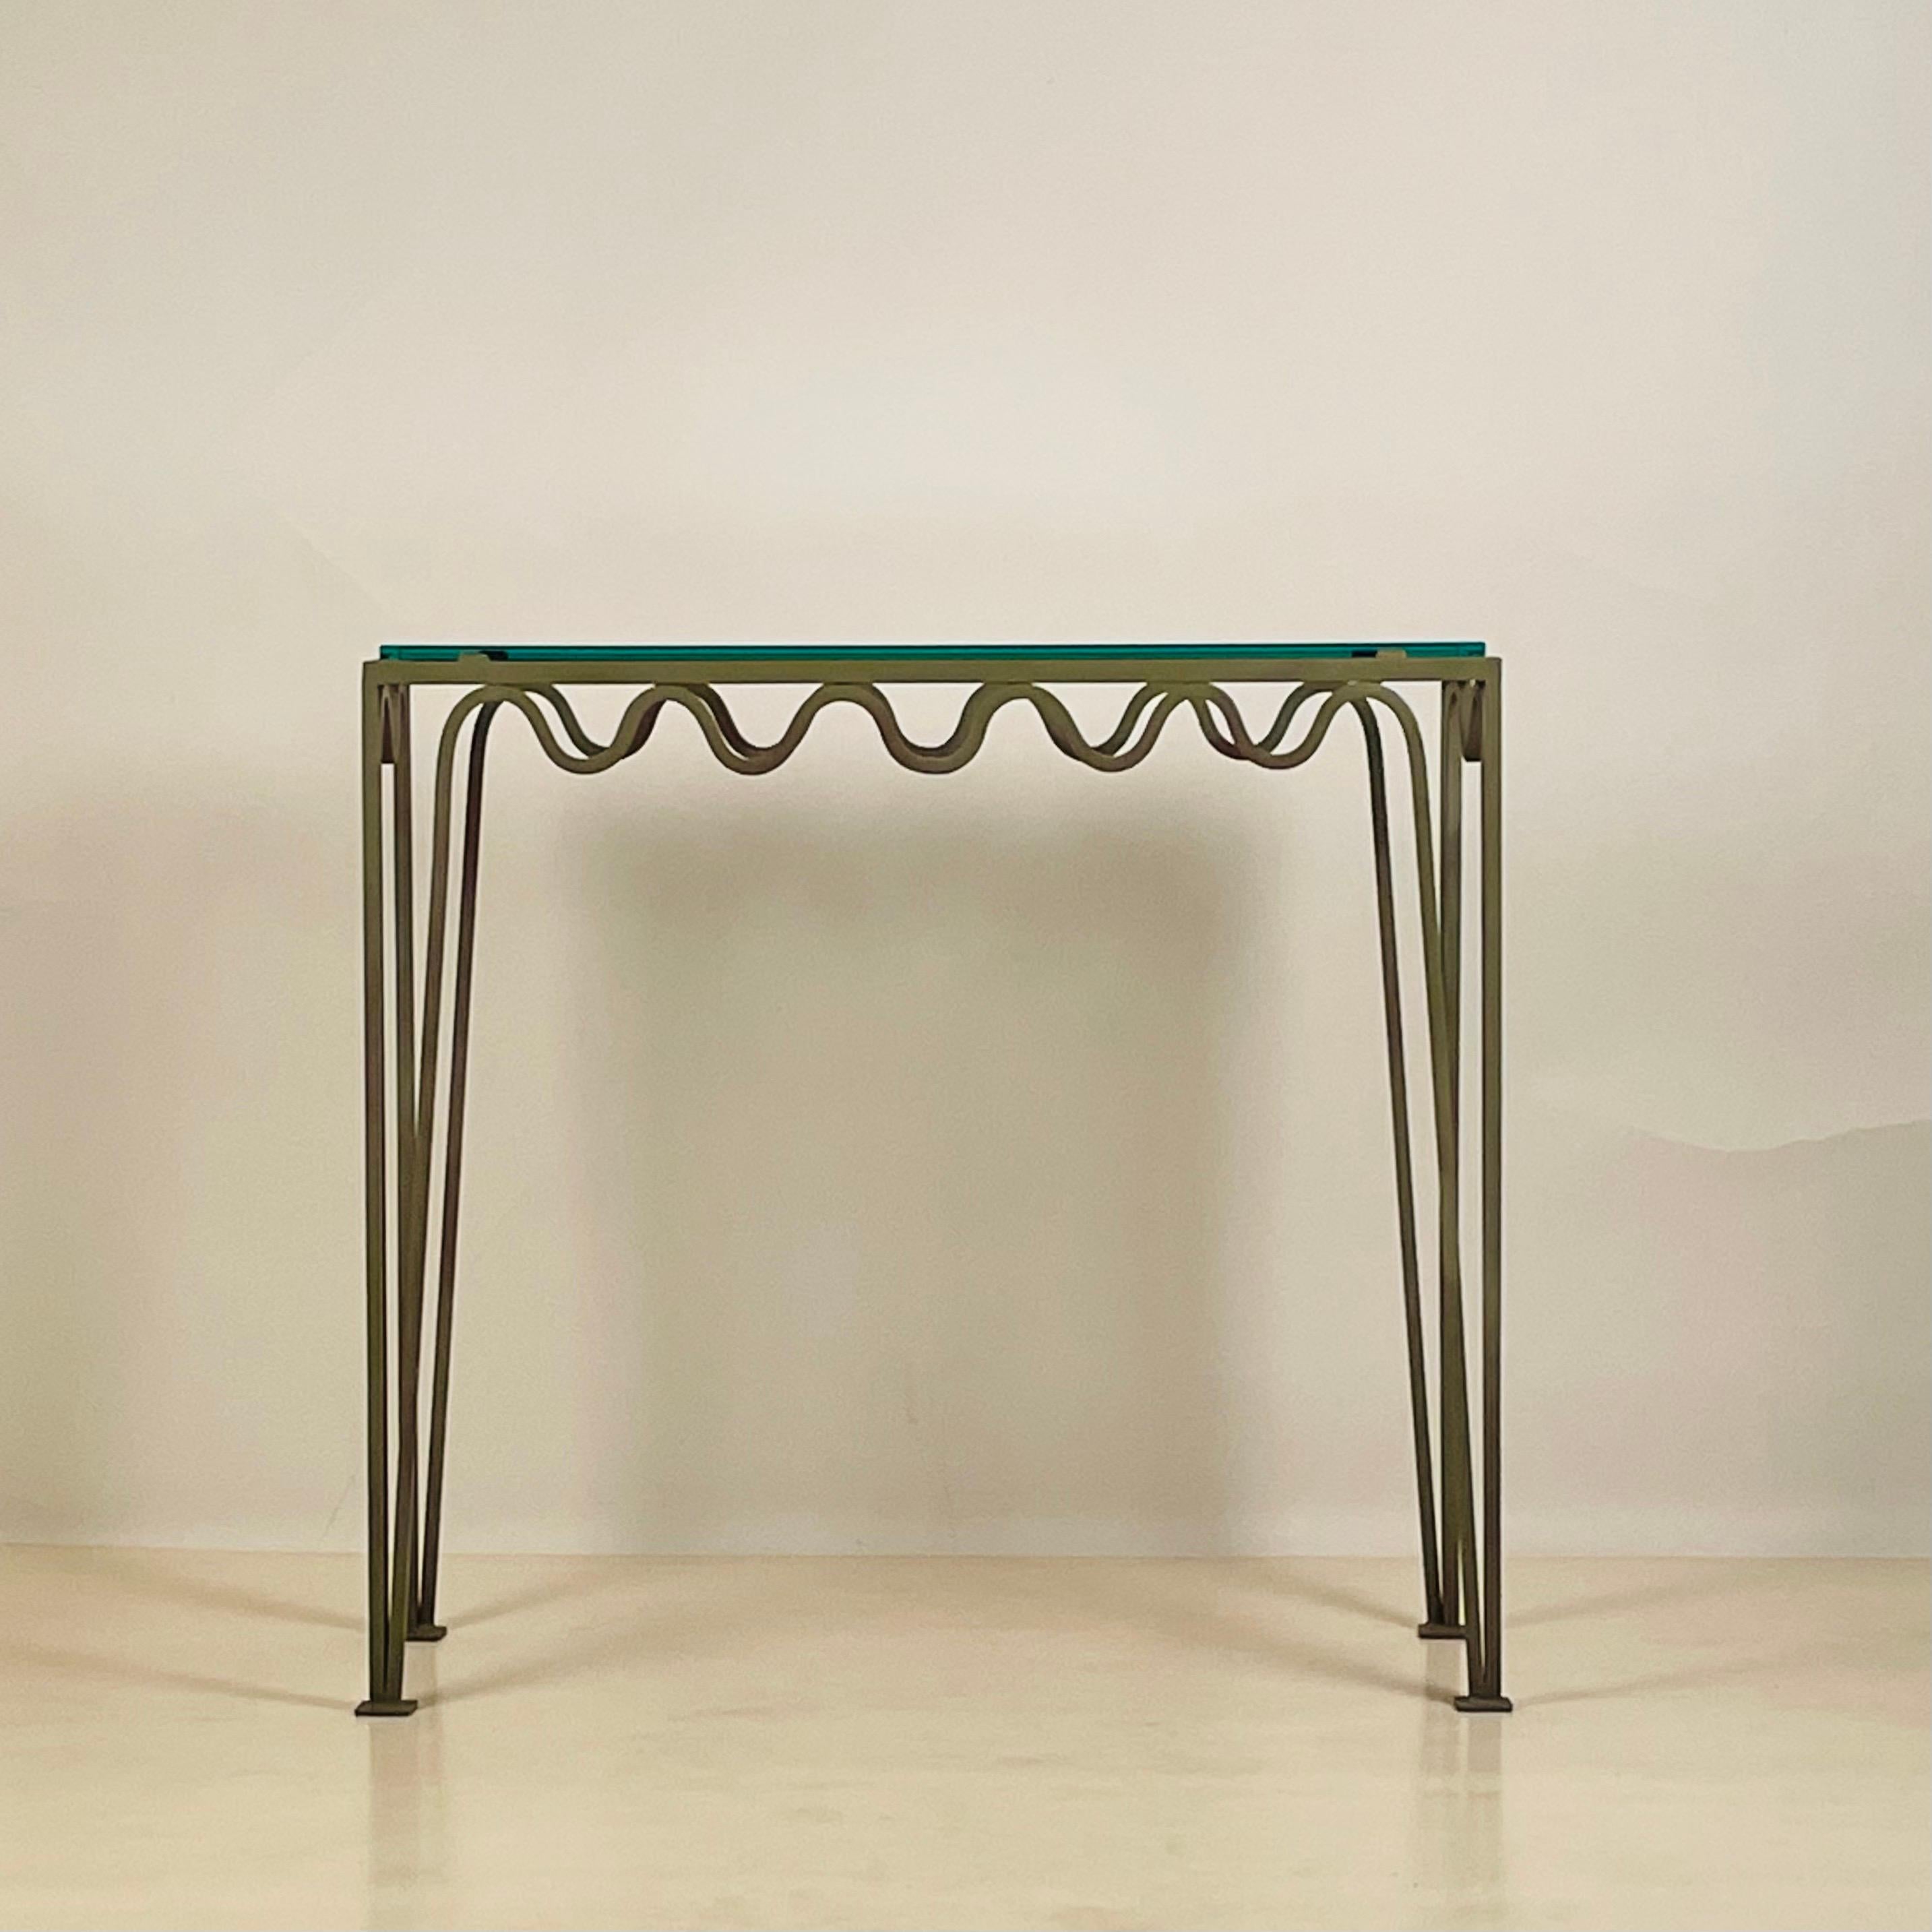 French Chic Verdigris 'Meandre' and Glass Console by Design Frères For Sale